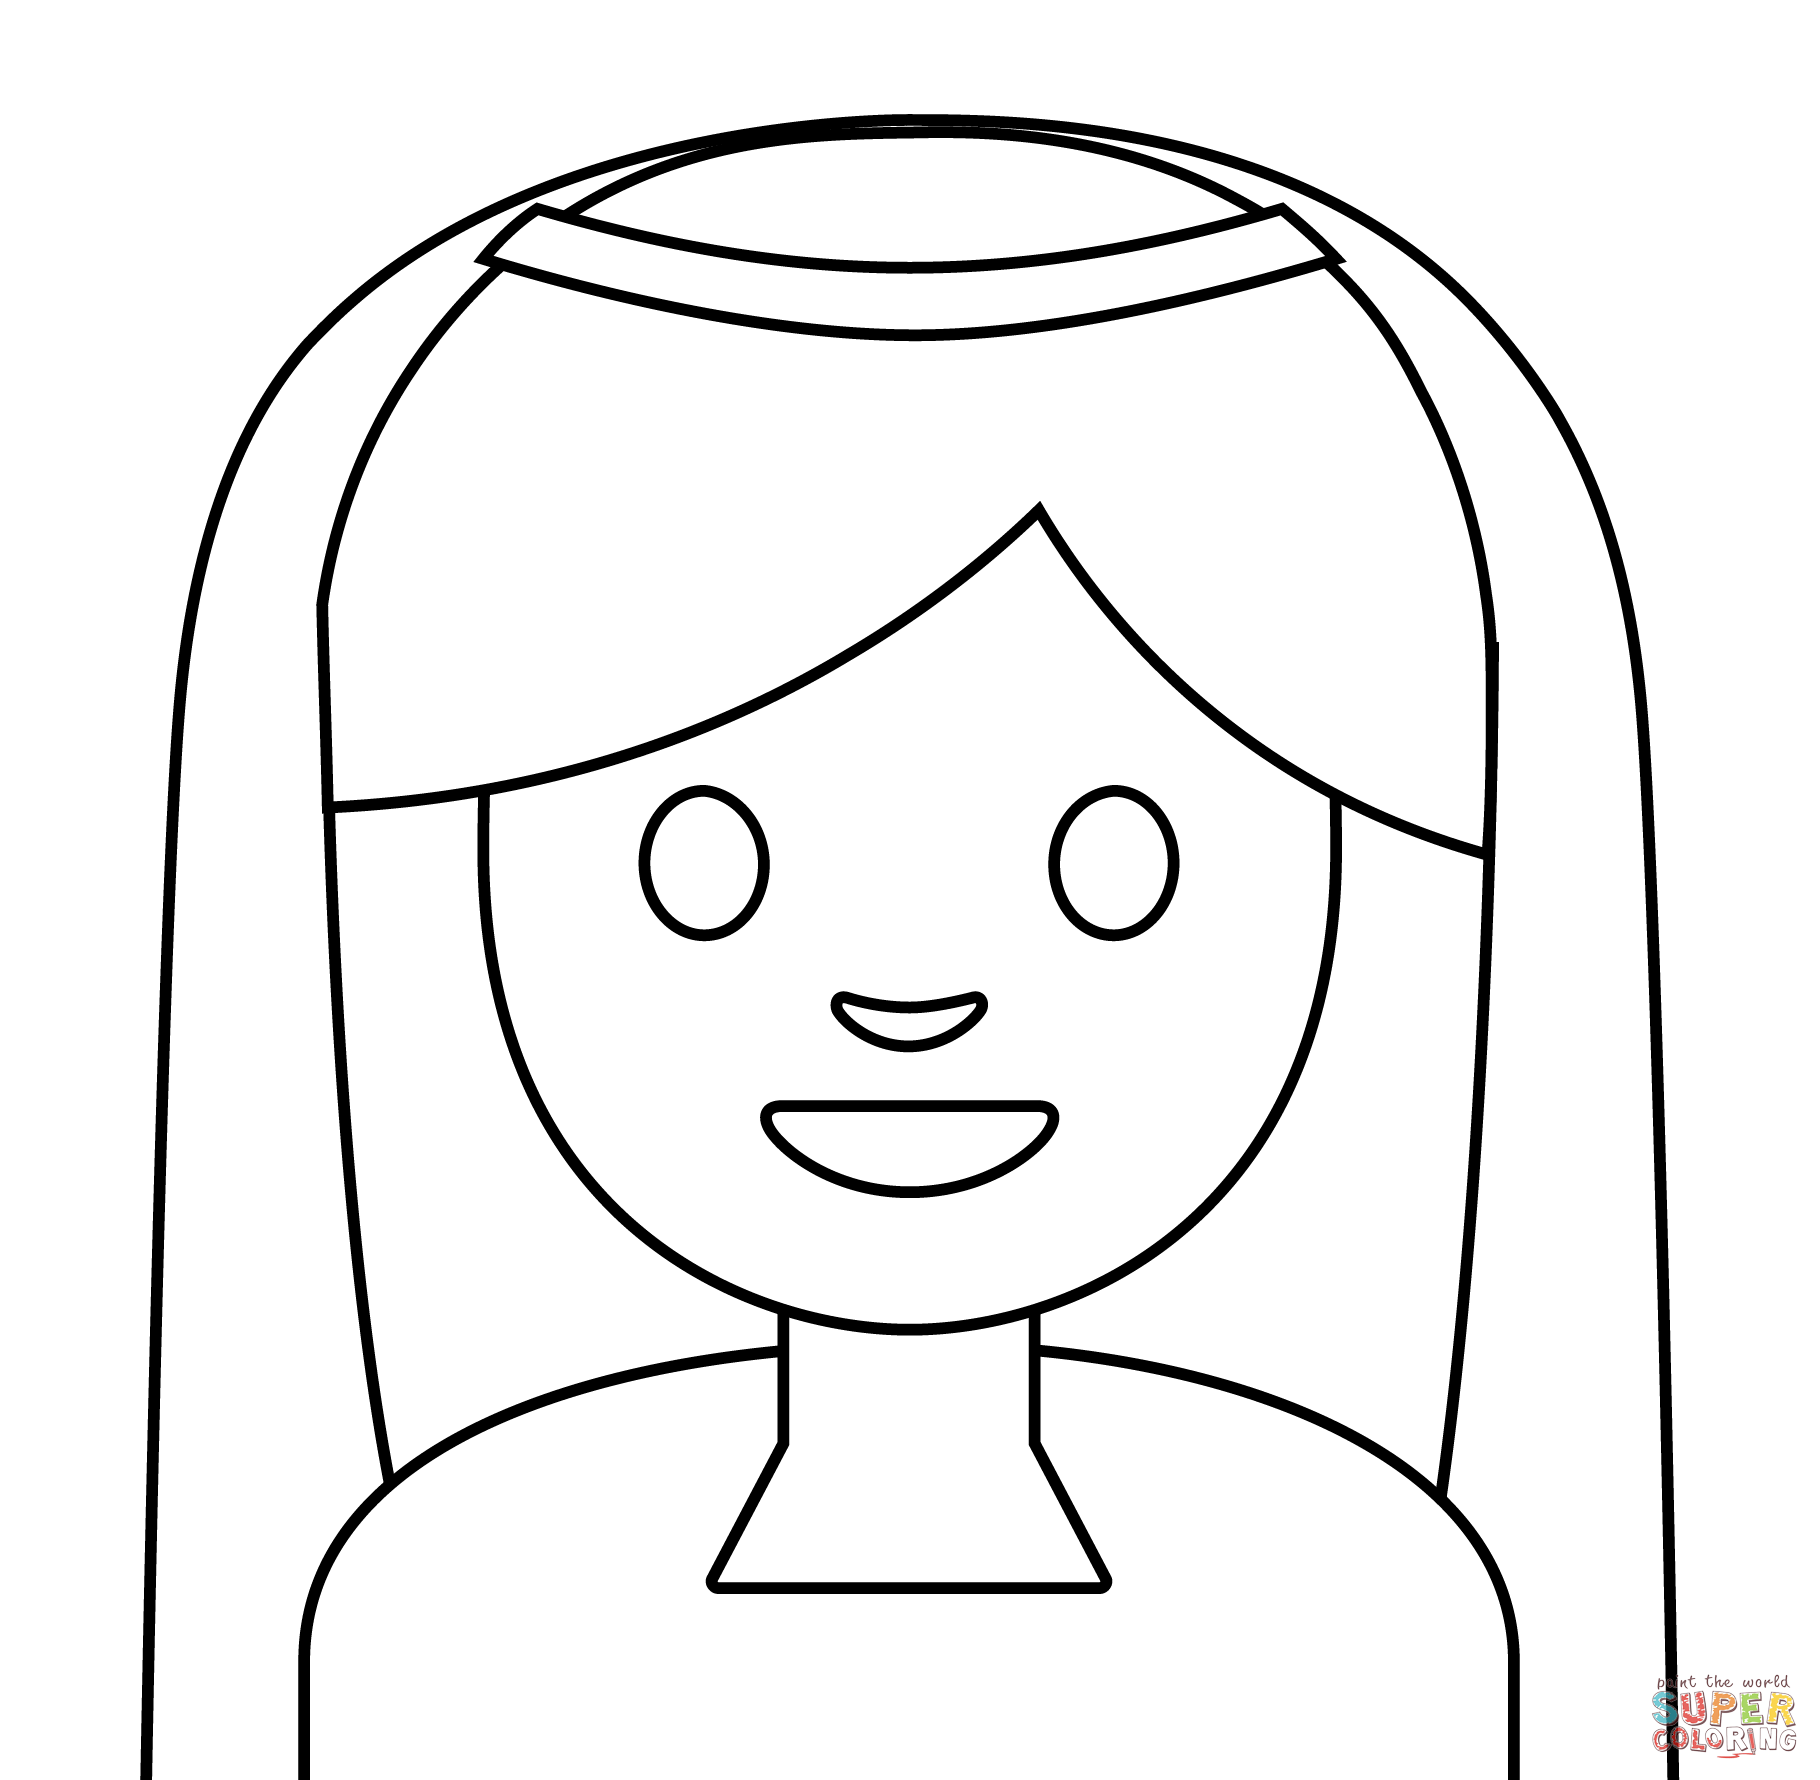 Person with veil emoji